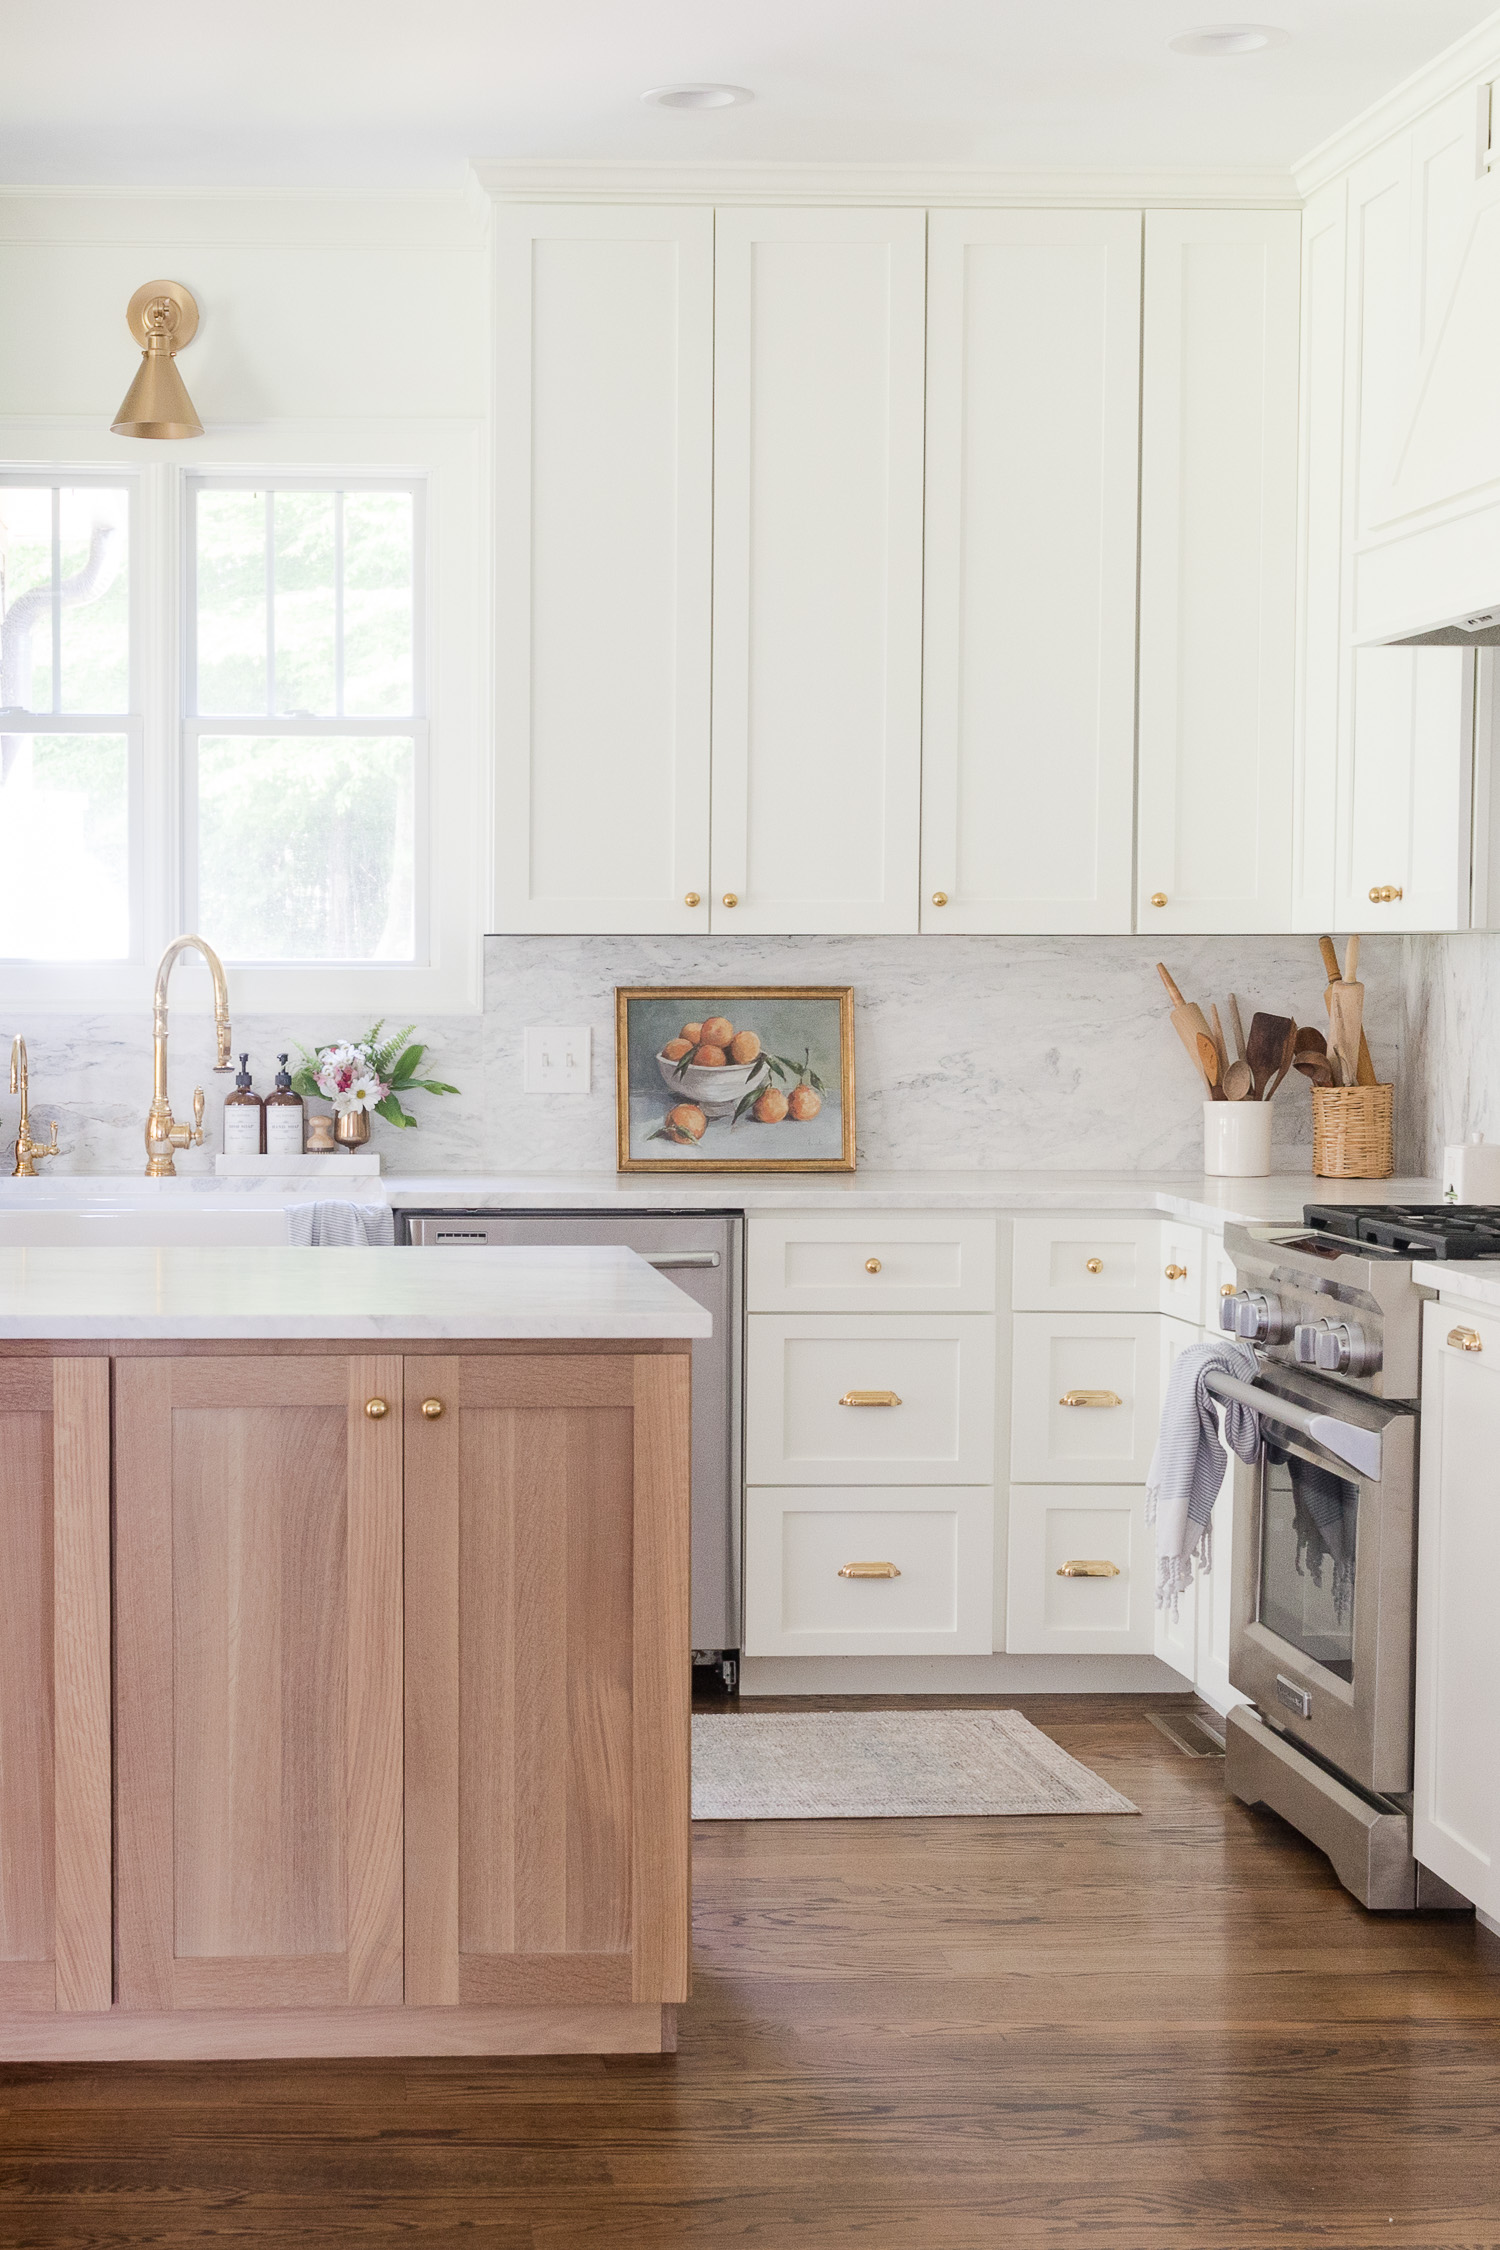 Benjamin Moore Simply white and wood kitchen